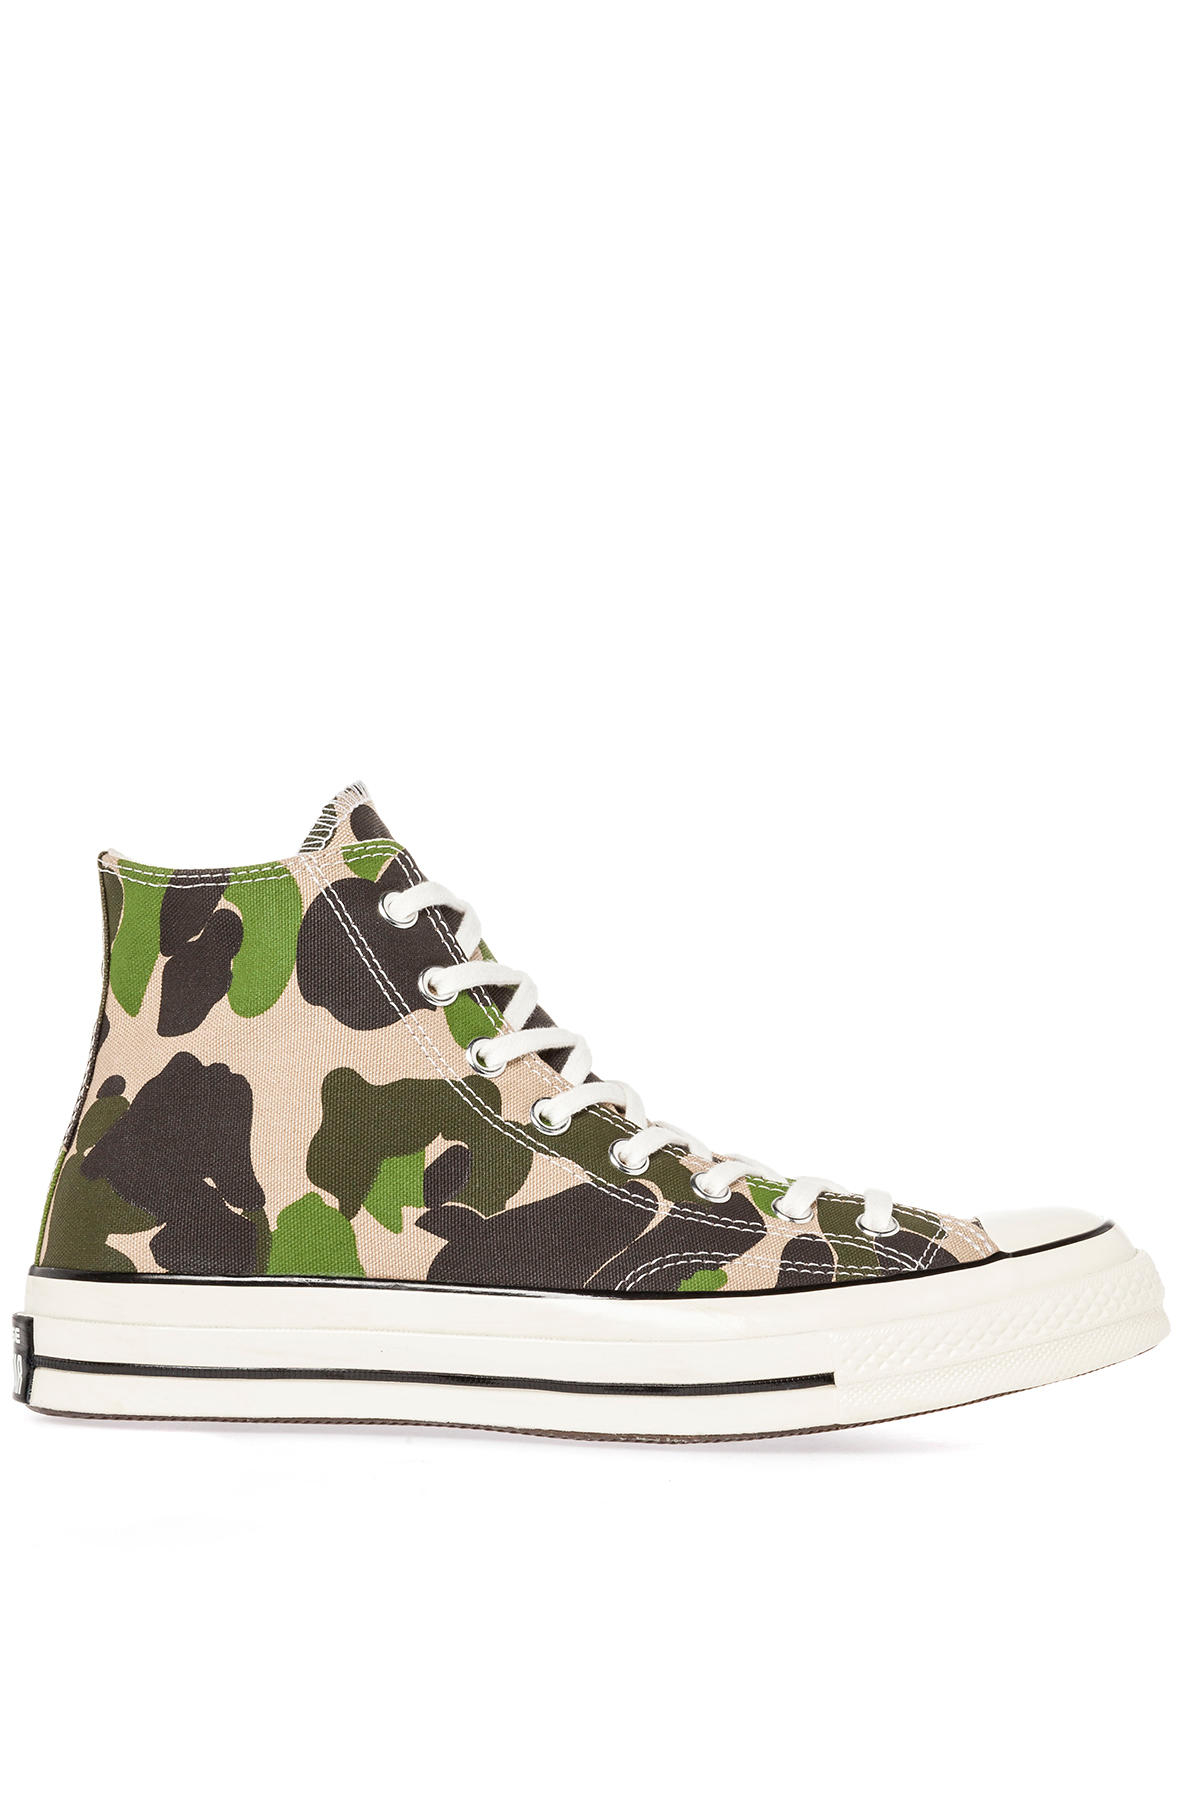 Lyst - Converse The Chuck Taylor All Star Hi 70 Sneaker in Green for Men